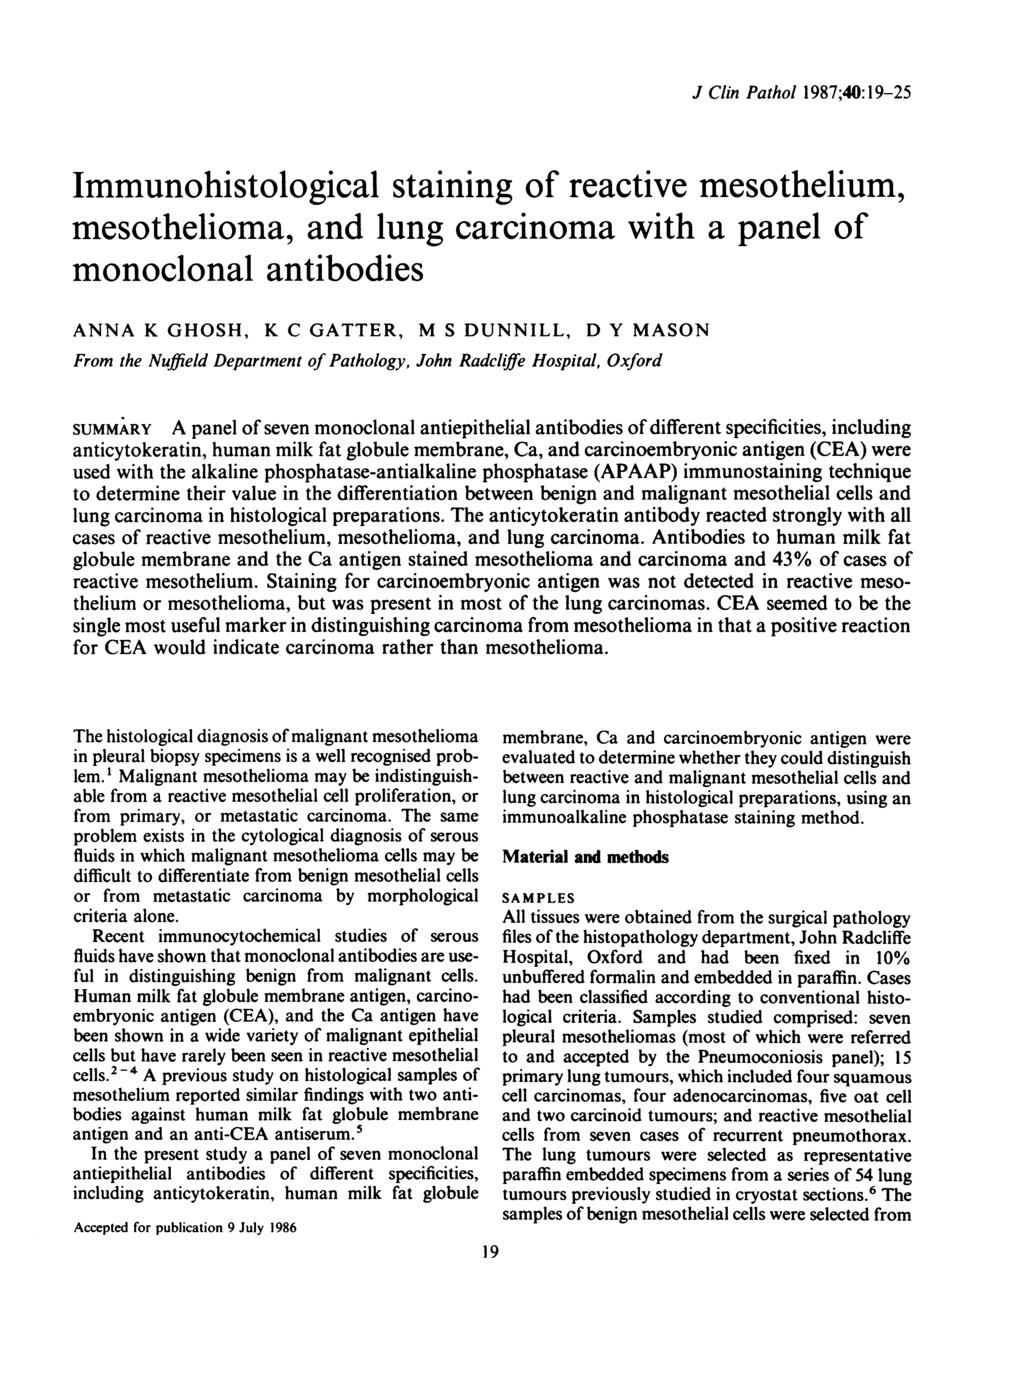 J Clin Pathol 1987;40:19-25 Immunohistological staining of reactive mesothelium, mesothelioma, and lung carcinoma with a panel of monoclonal antibodies ANNA K GHOSH, K C GATTER, M S DUNNILL, D Y